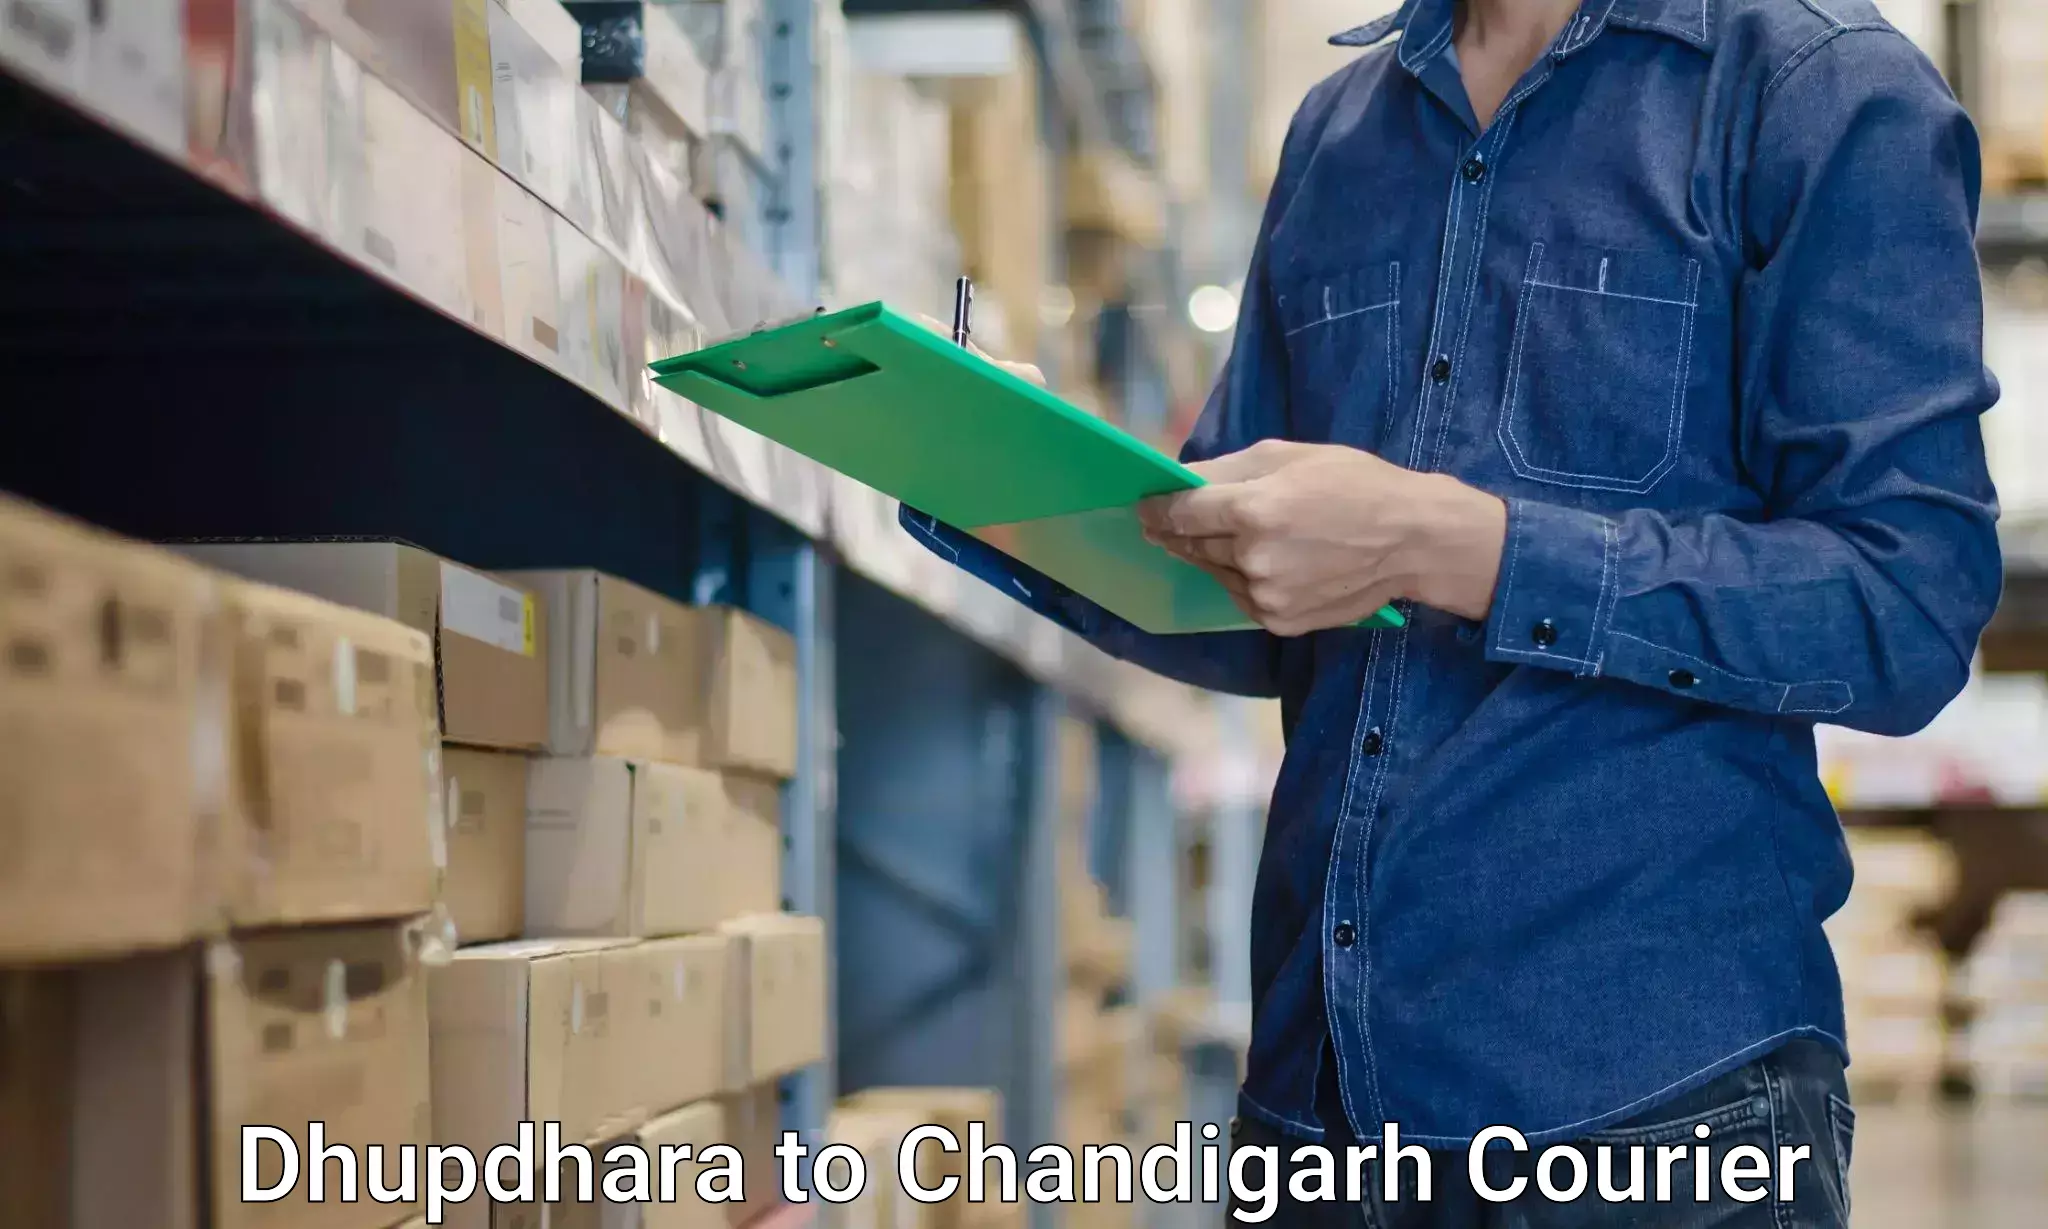 Furniture moving assistance Dhupdhara to Chandigarh